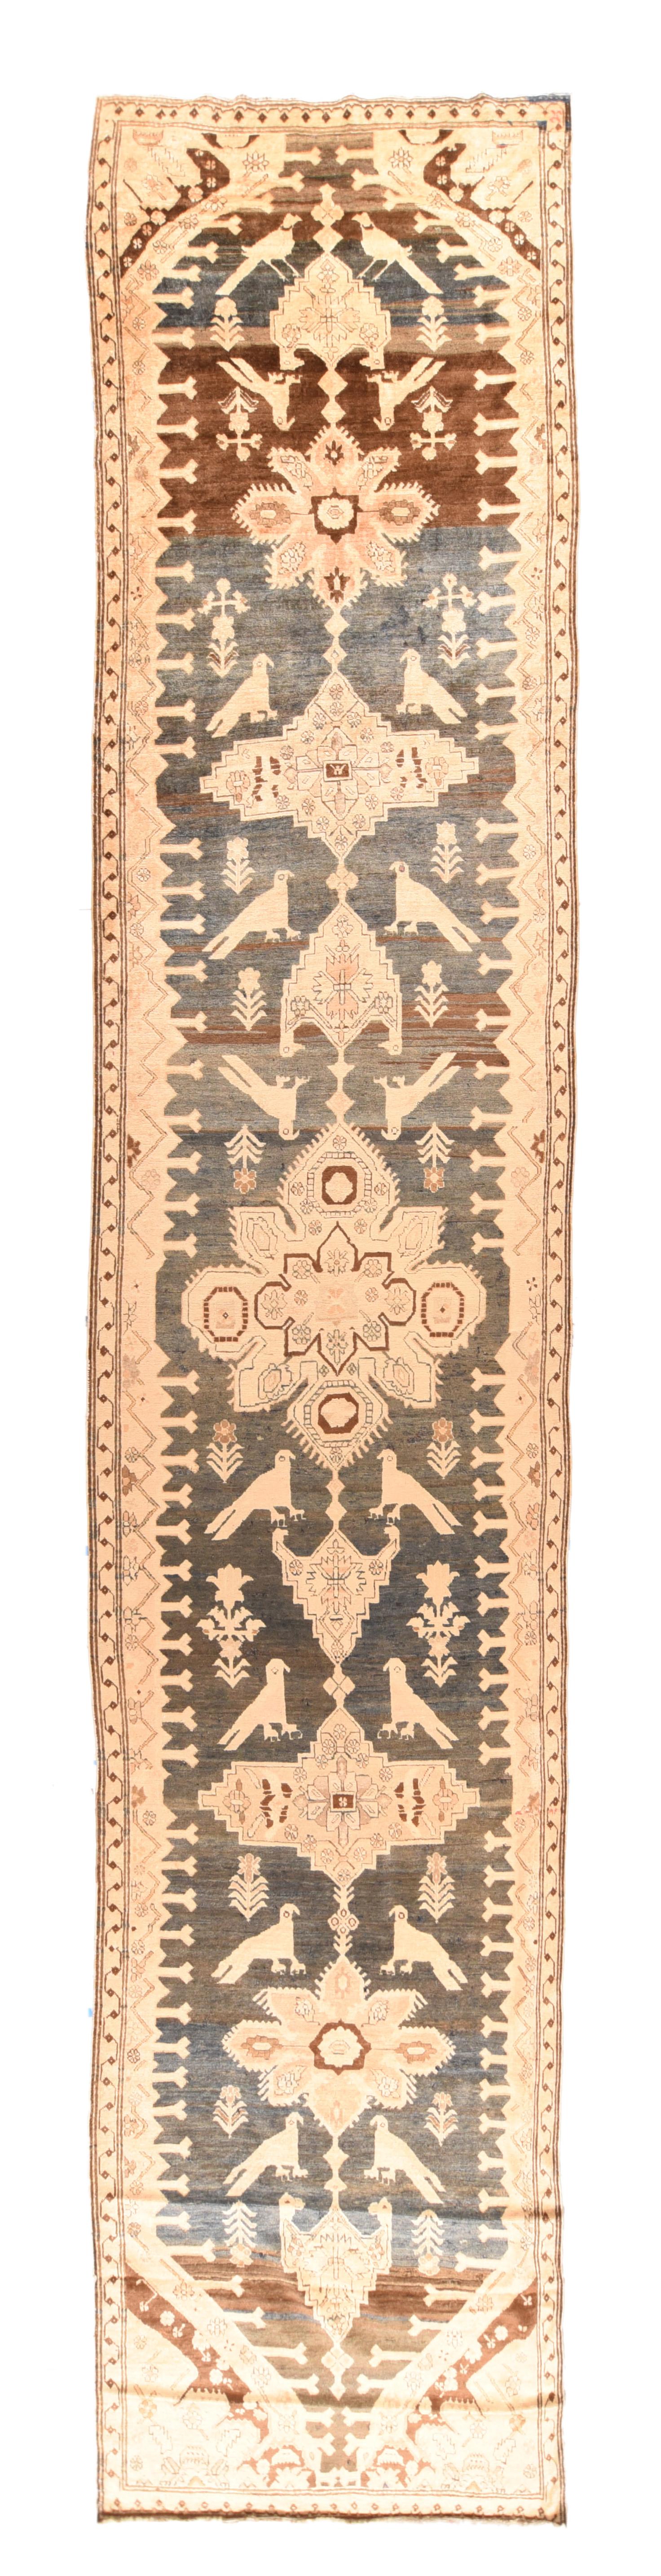 Antique Karaeagh Rug In Excellent Condition For Sale In New York, NY